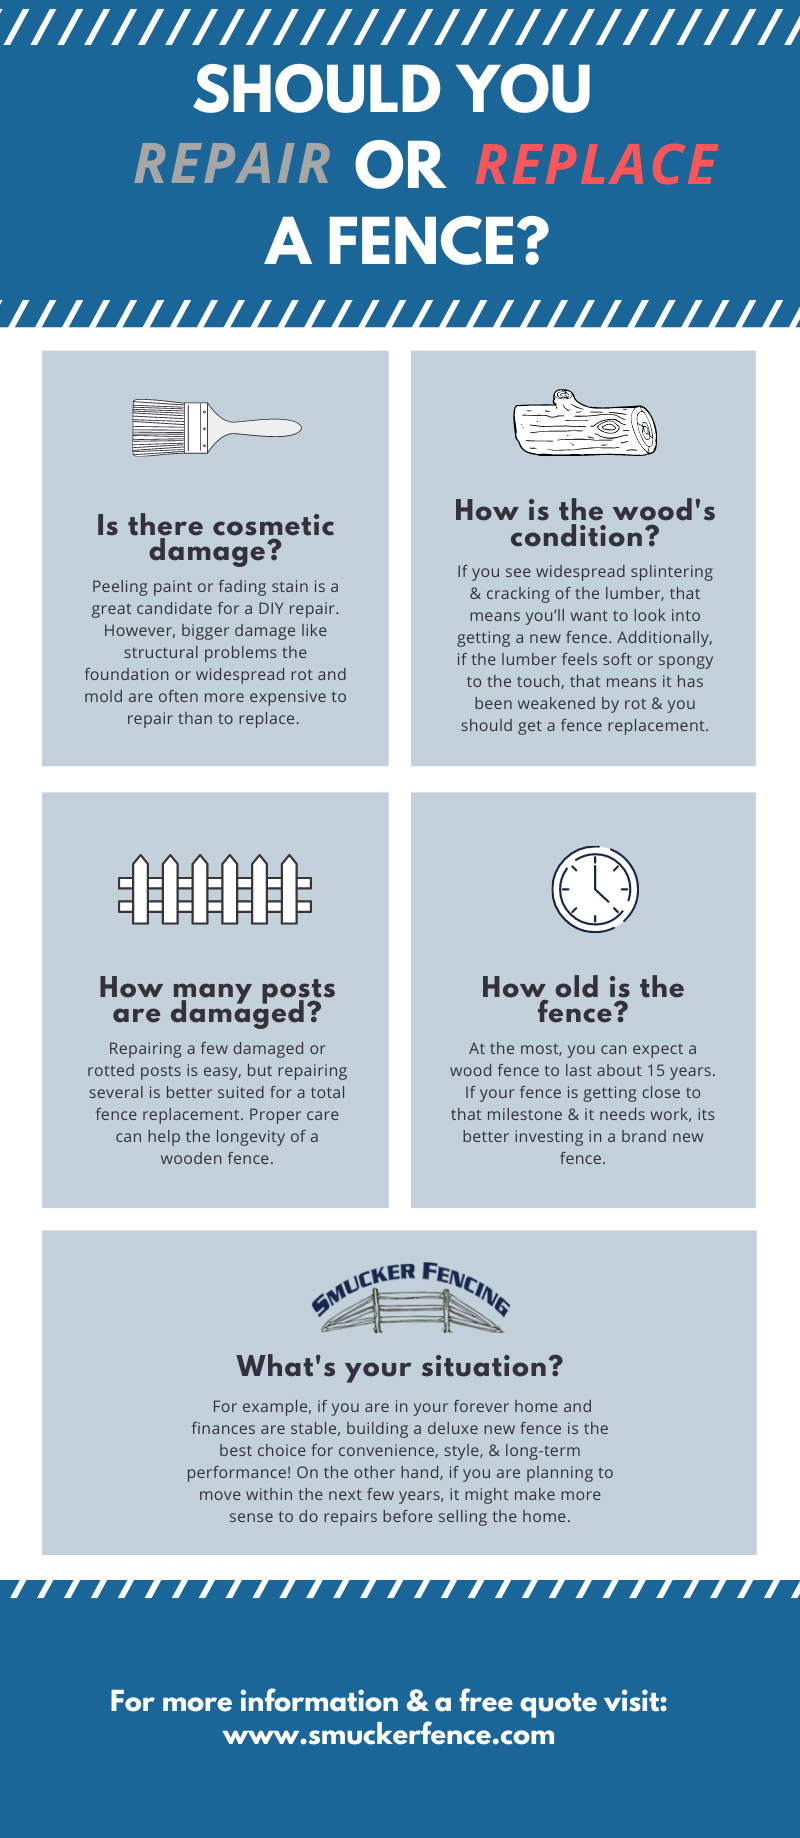 Repair or replace a fence infographic